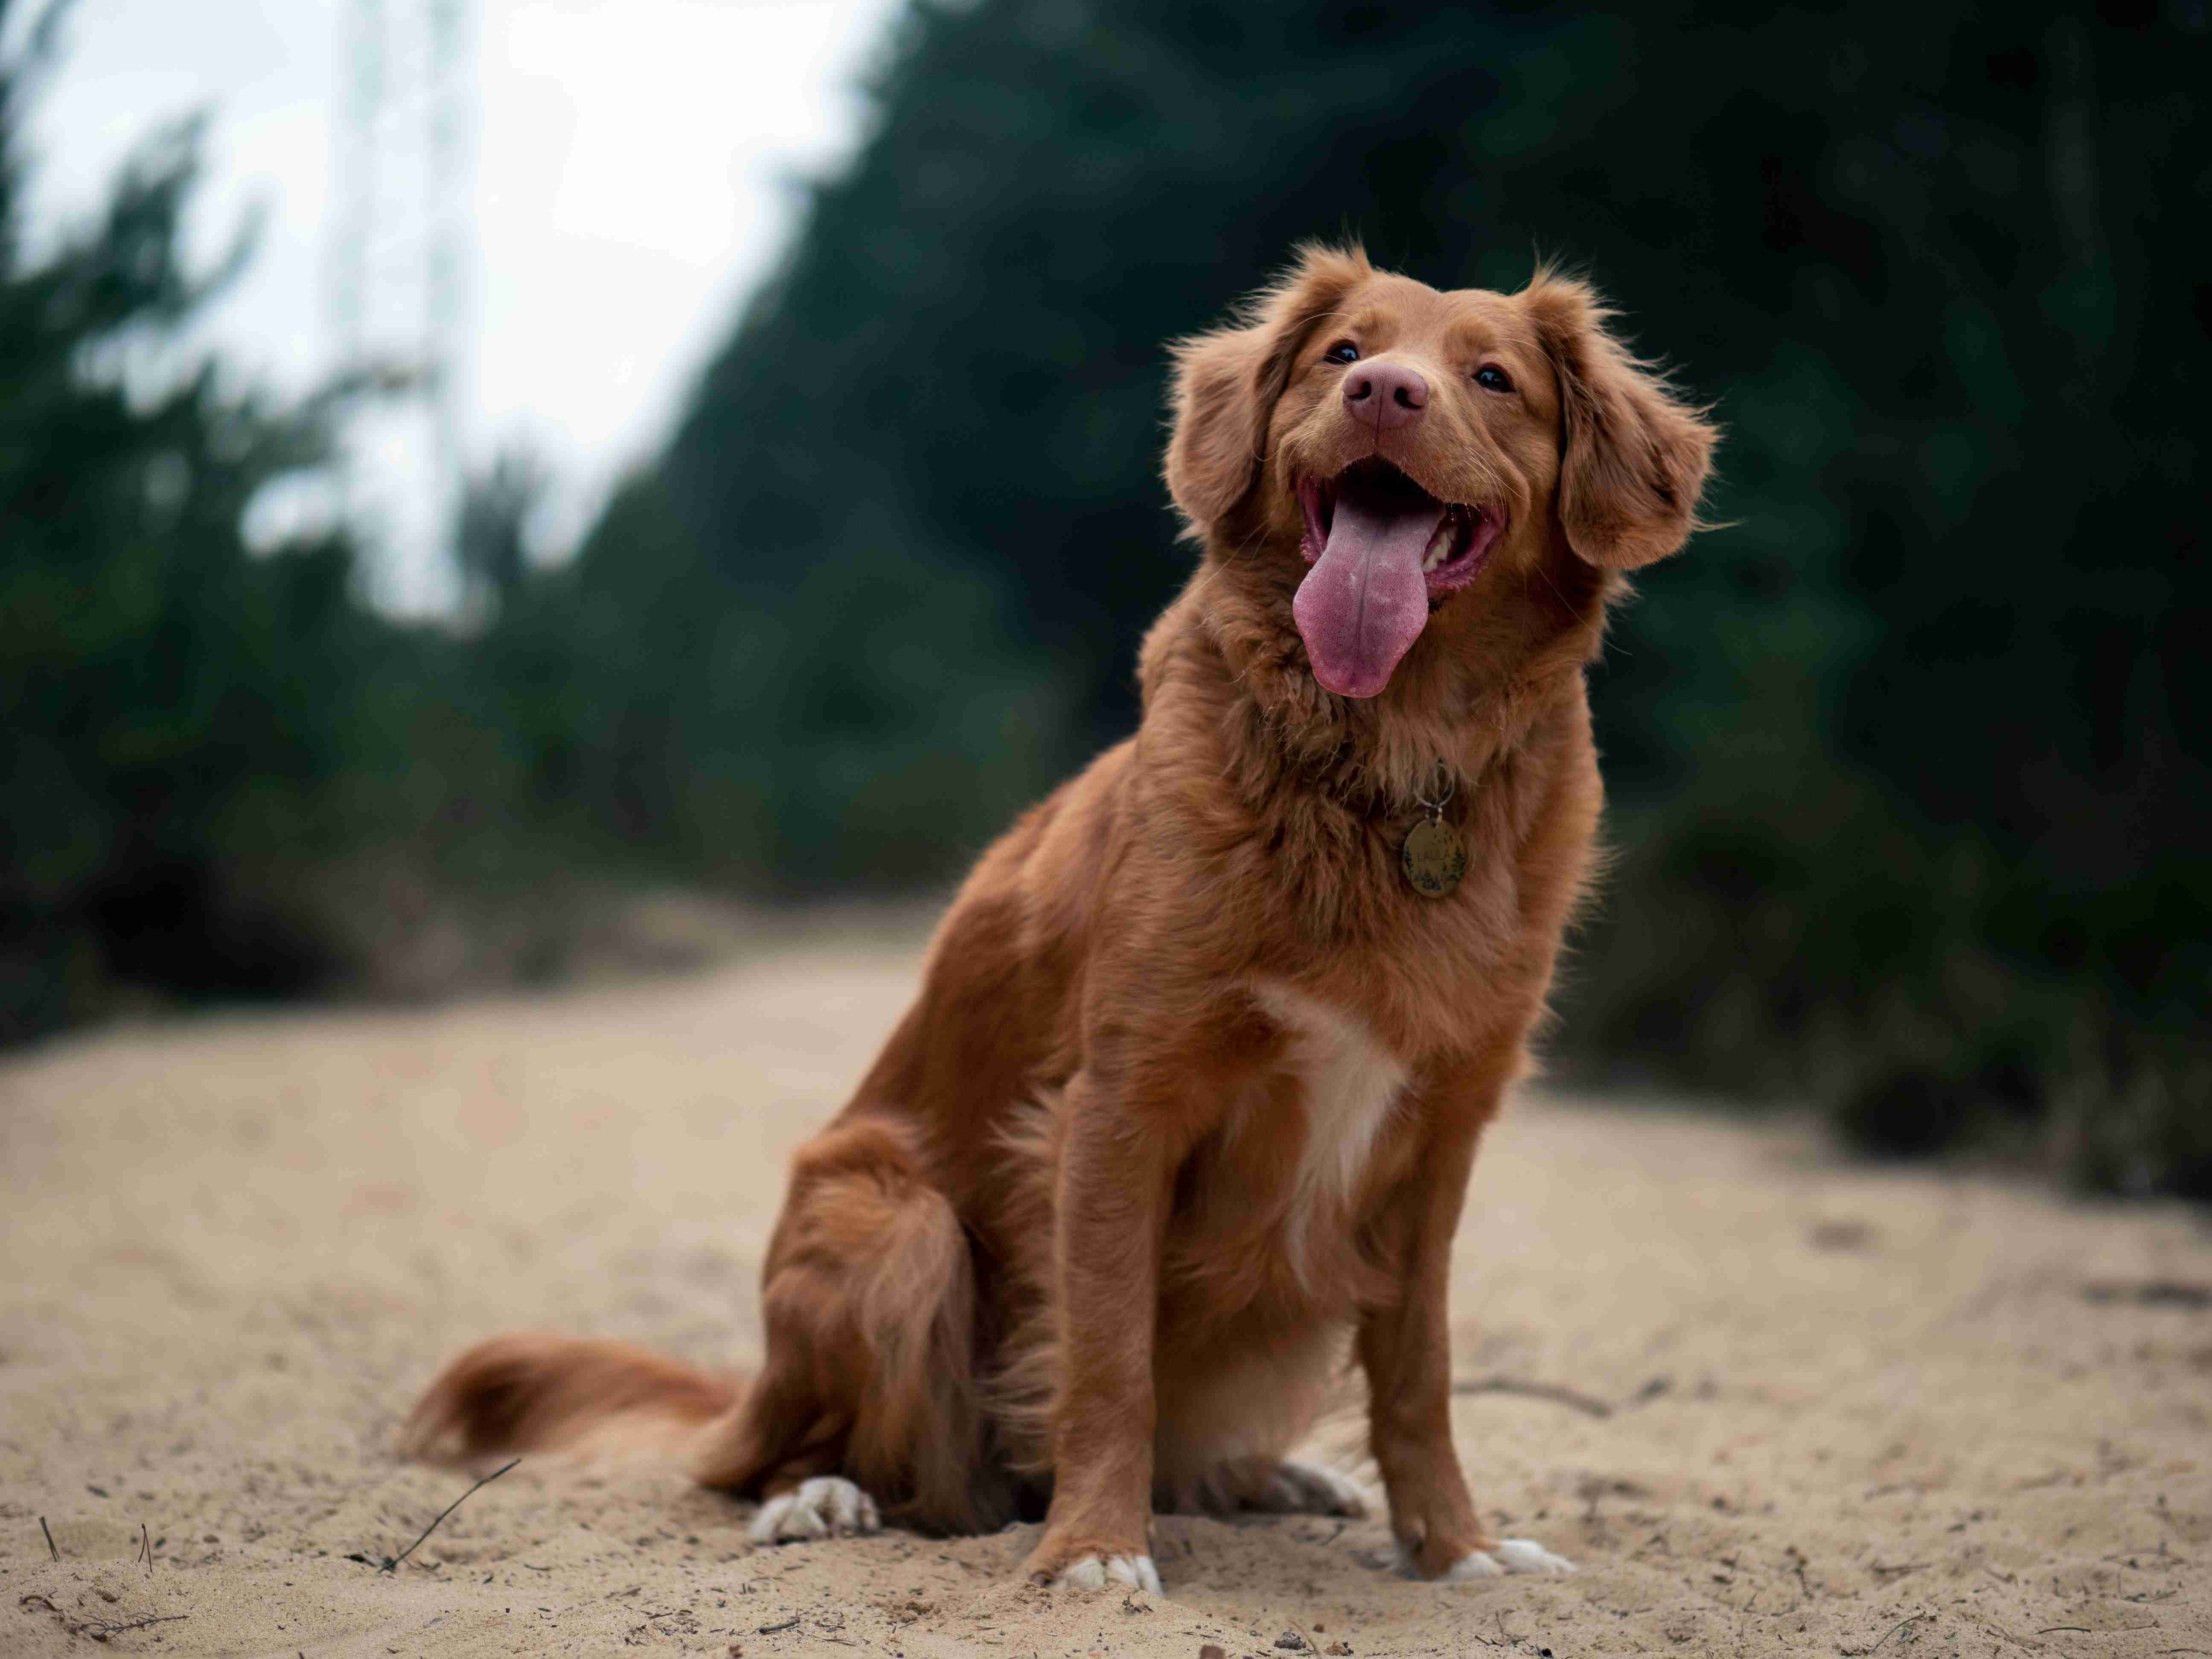 Are there any specific grooming techniques that are beneficial for golden retrievers?